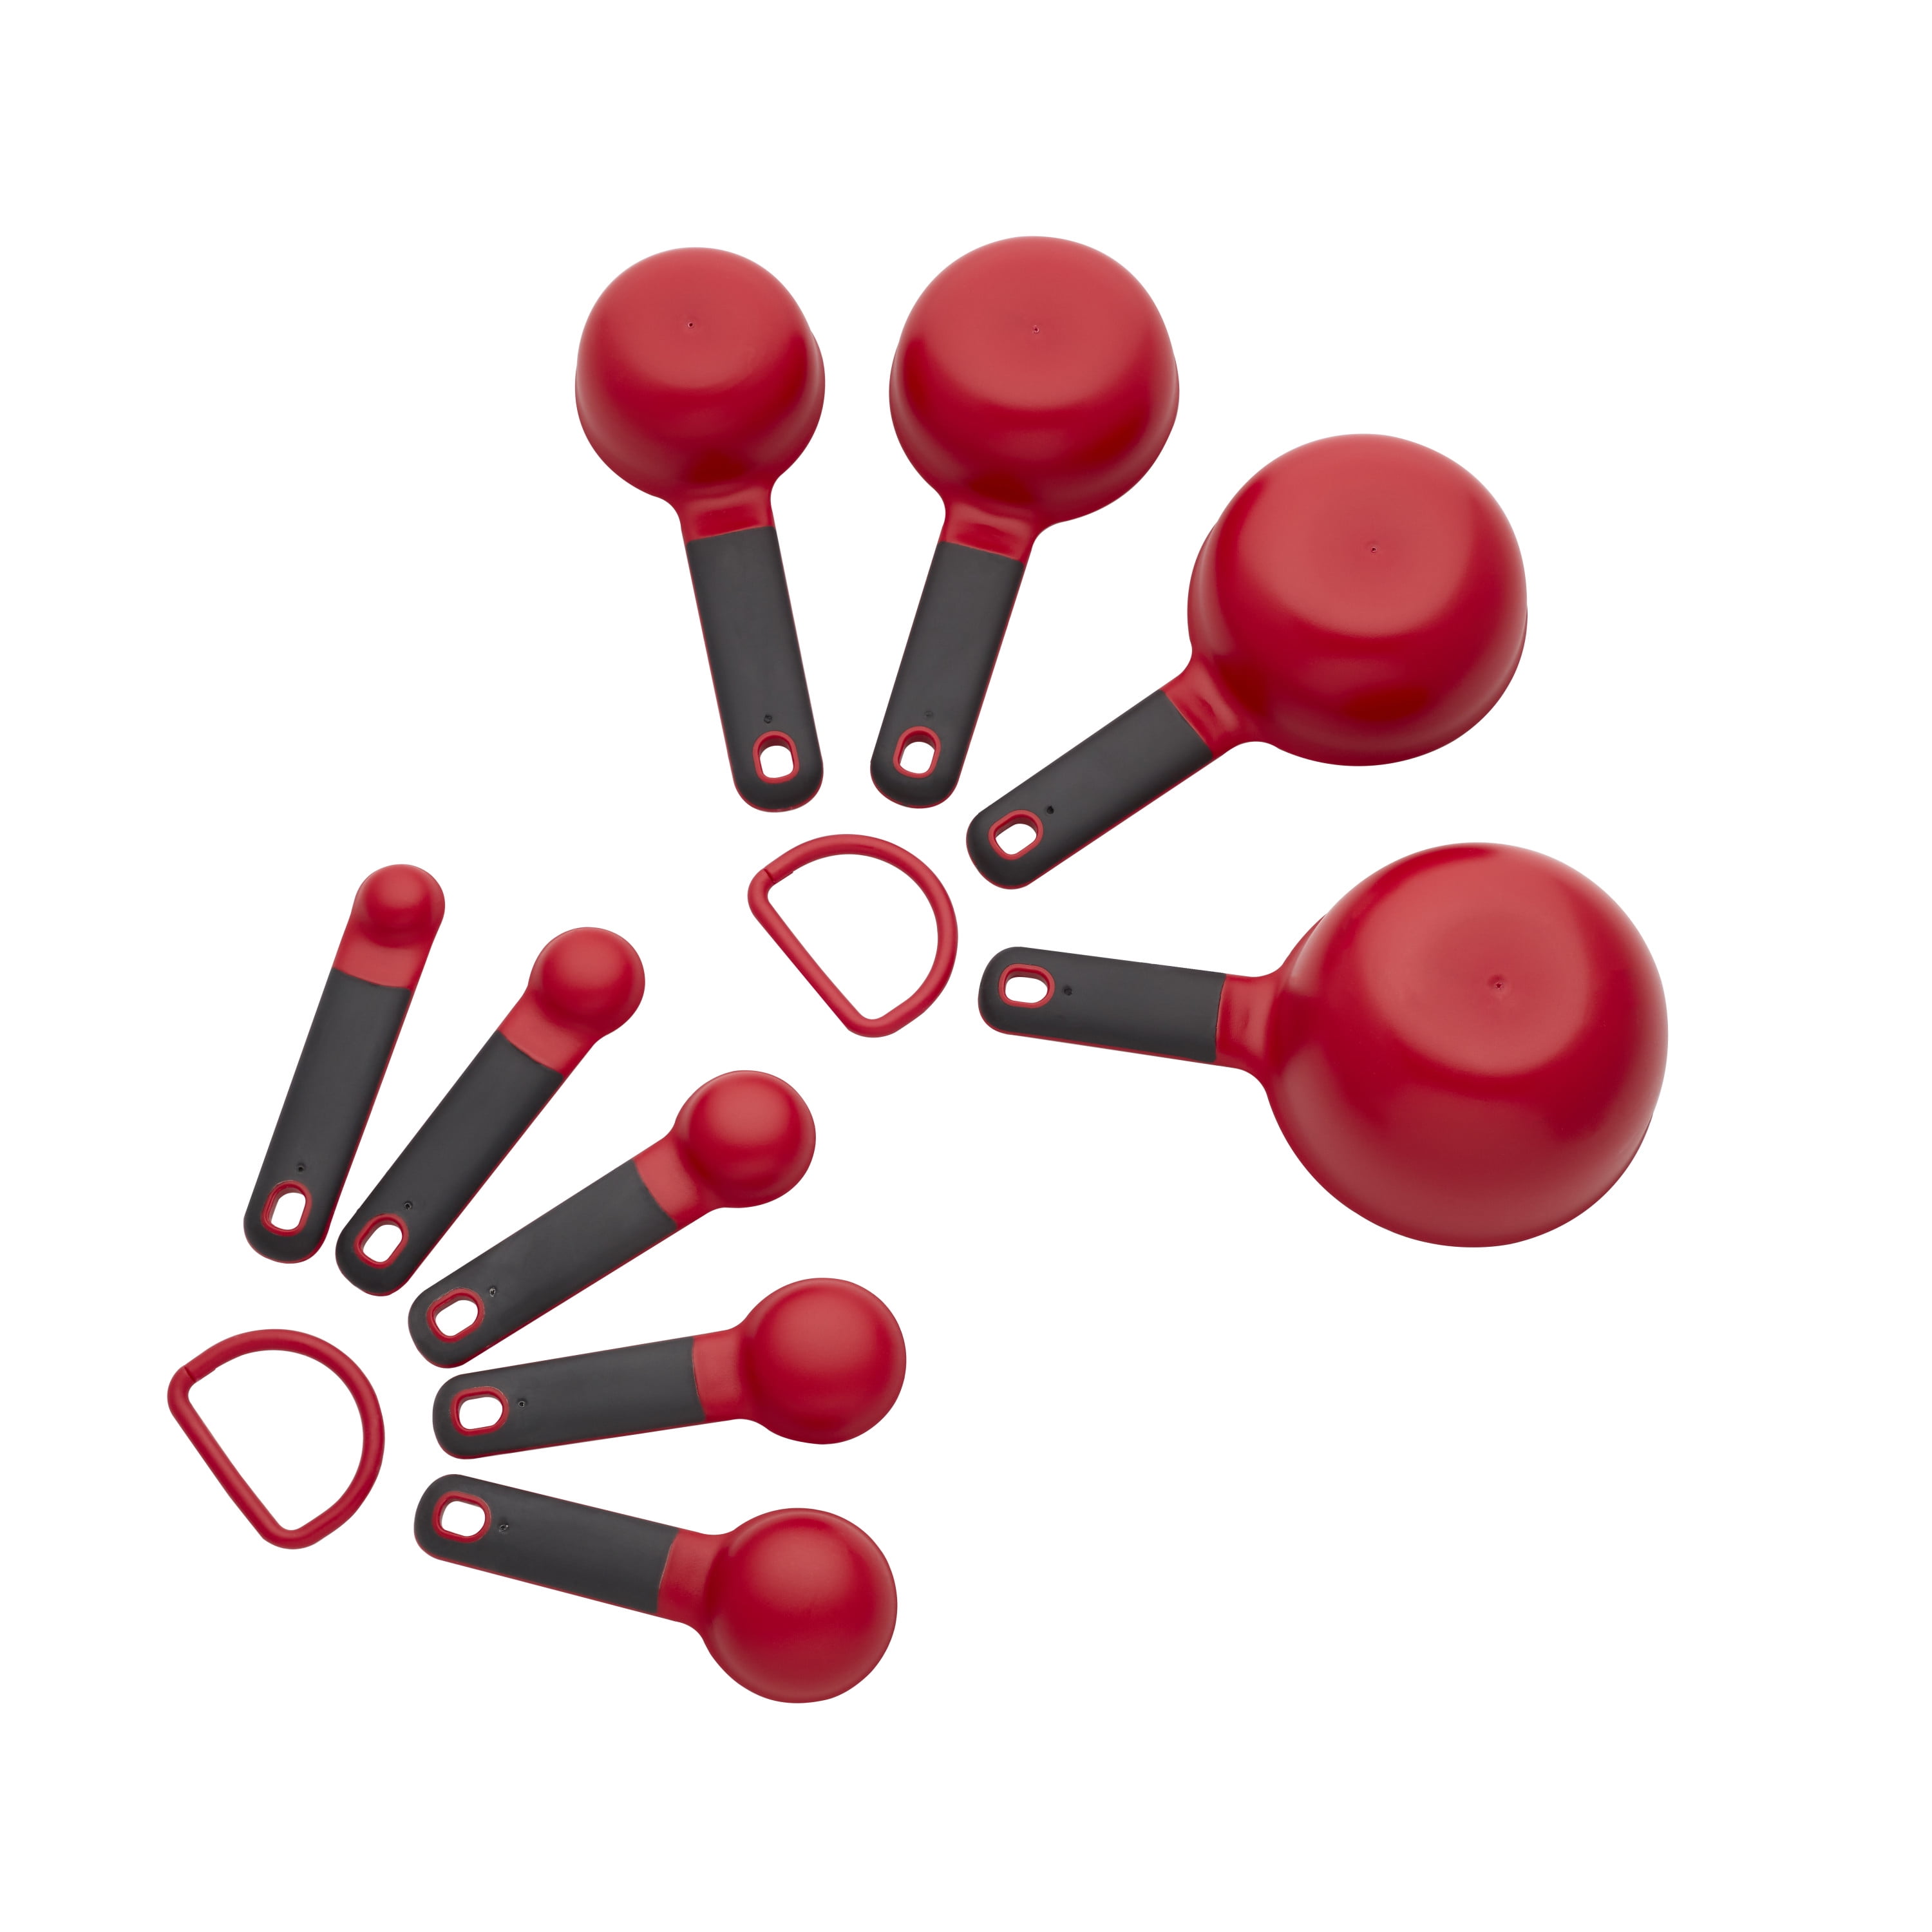 KitchenAid Classic Measuring Cups And Spoons Set, Set of 9, Red